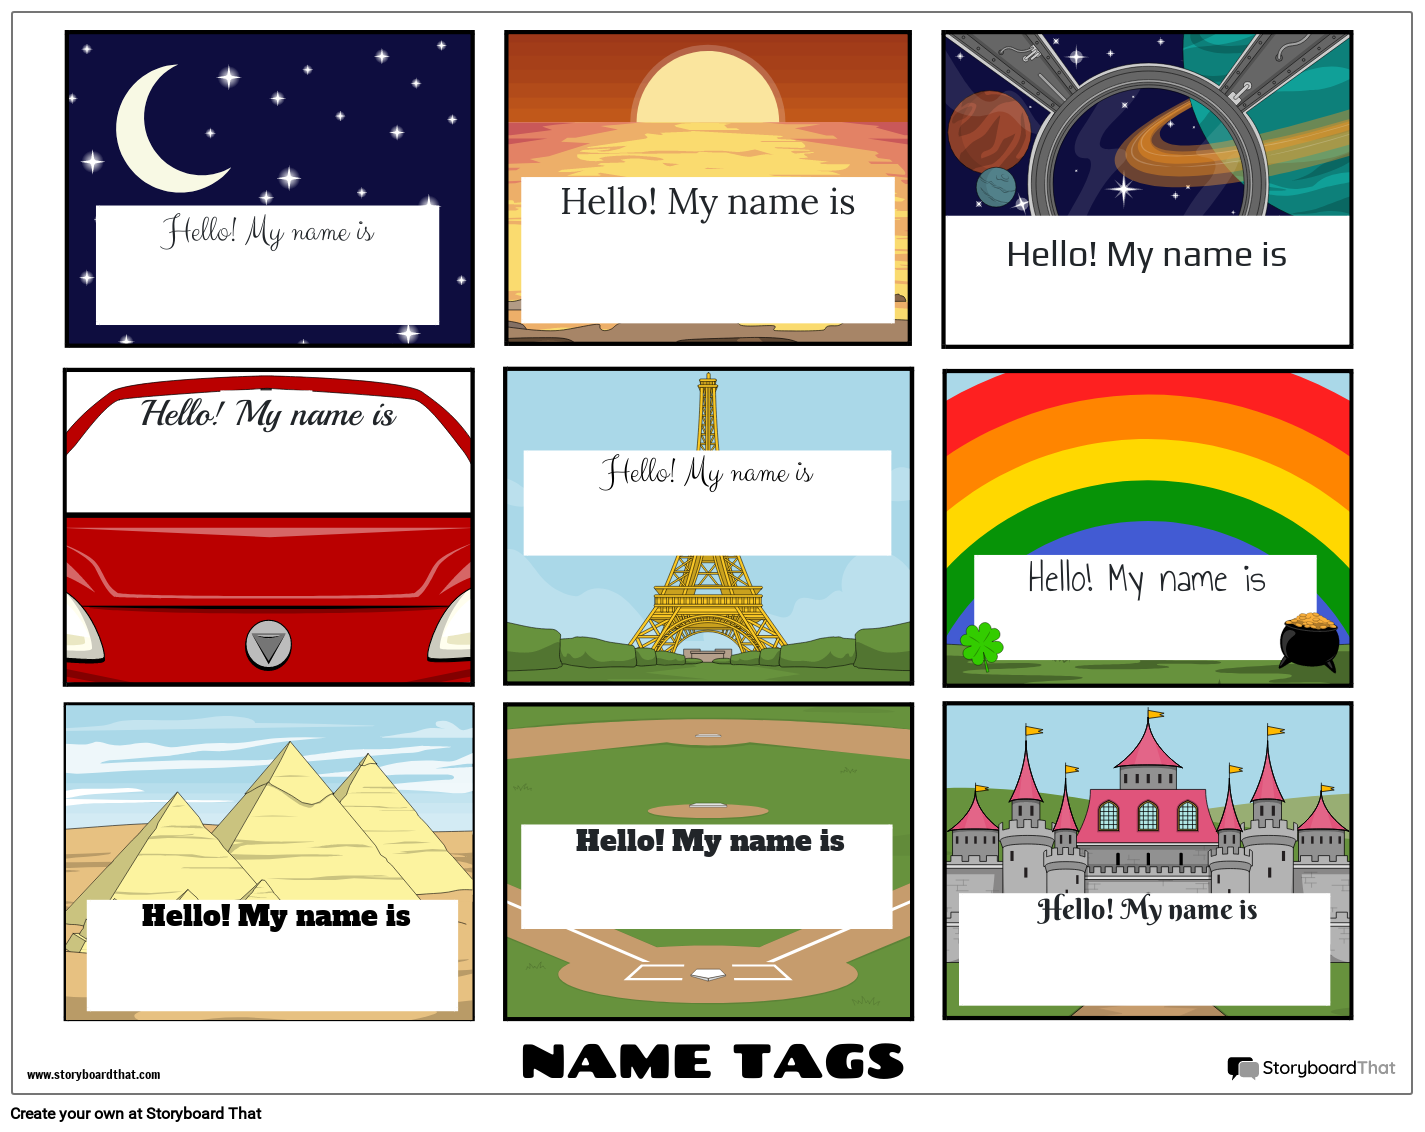 new-create-page-name-tag-template-2-storyboard